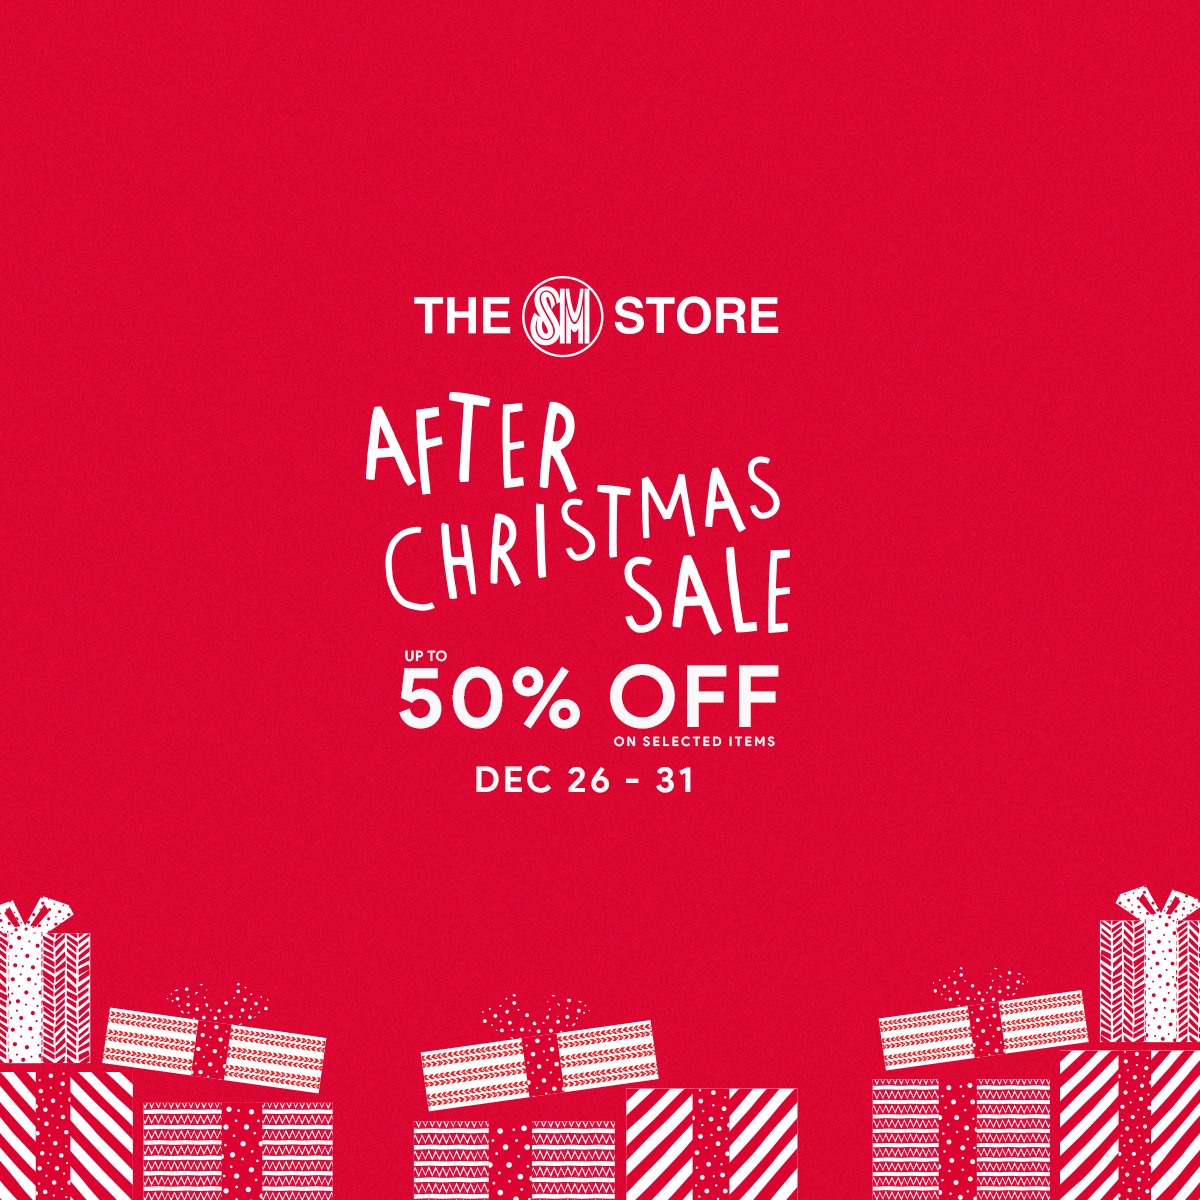 SM Store’s After-Christmas Sale 2018